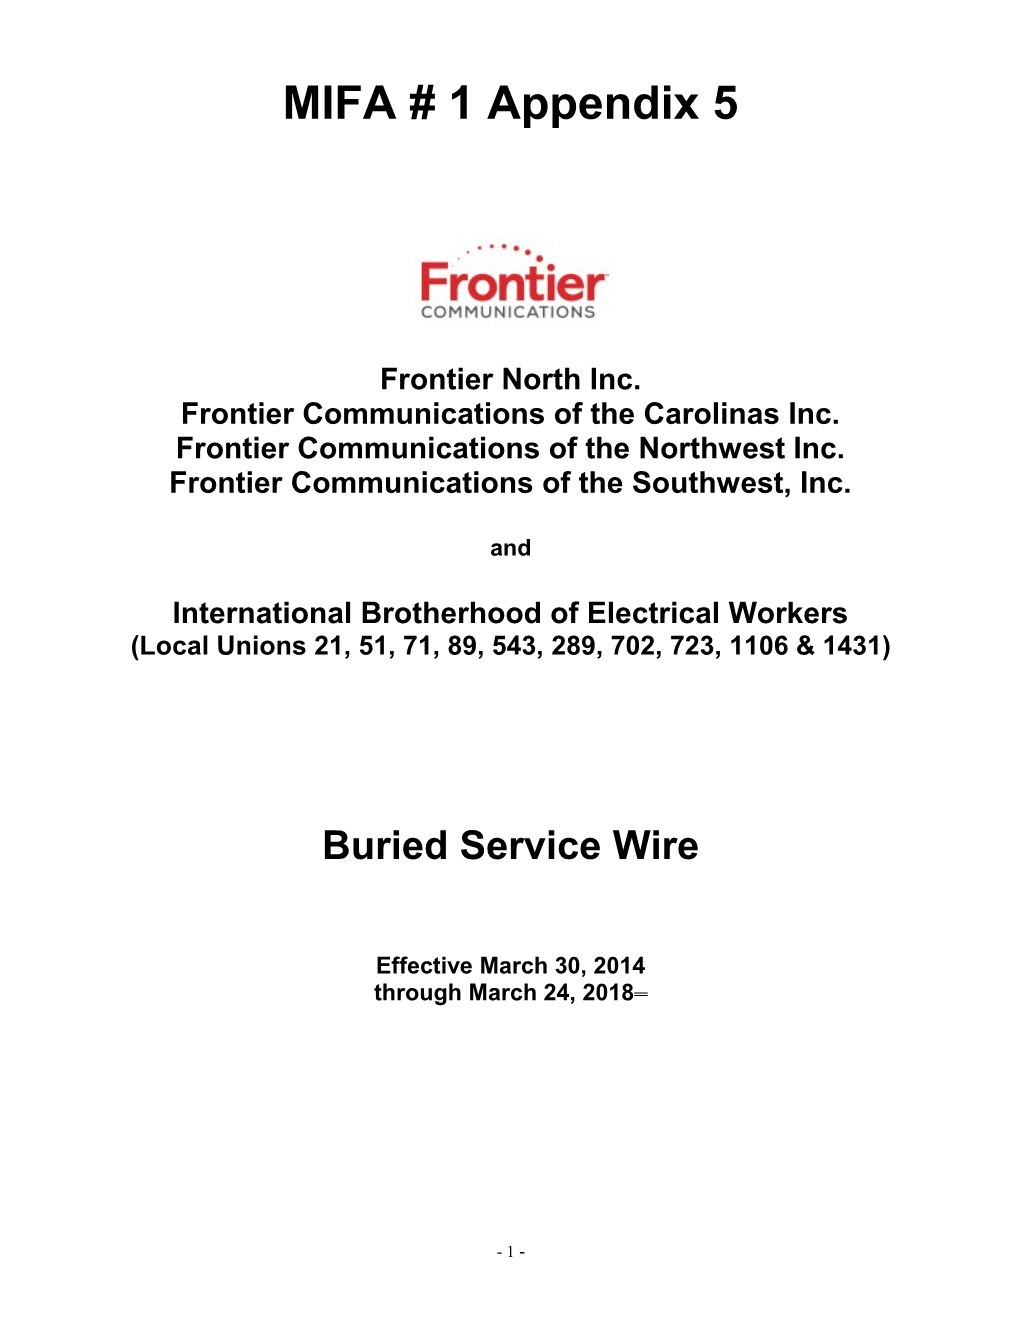 MIFA #1 Appendix Buried Service Wire Agreement